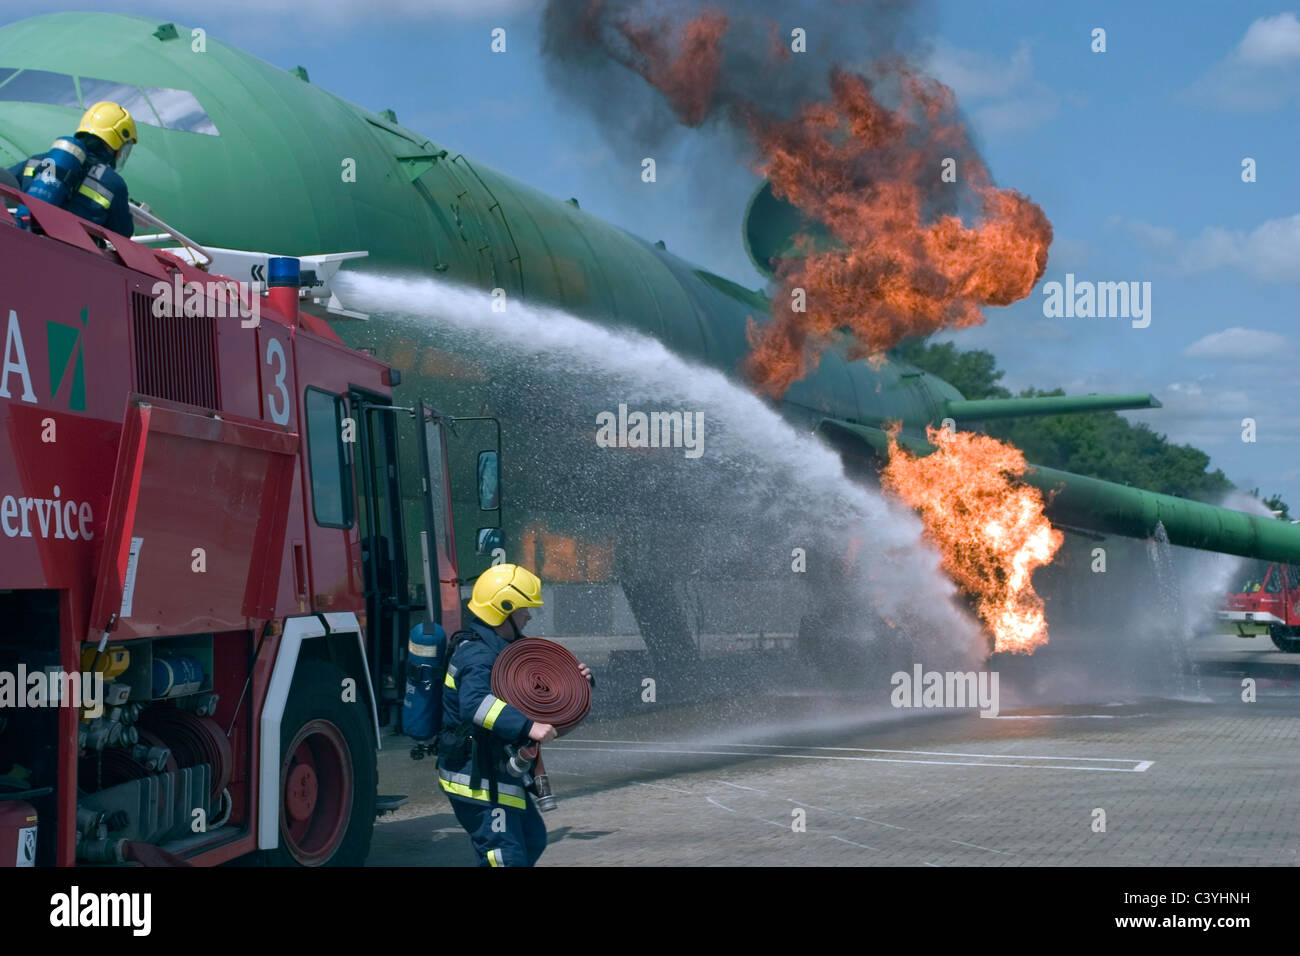 Airport firefighting exercise Stock Photo